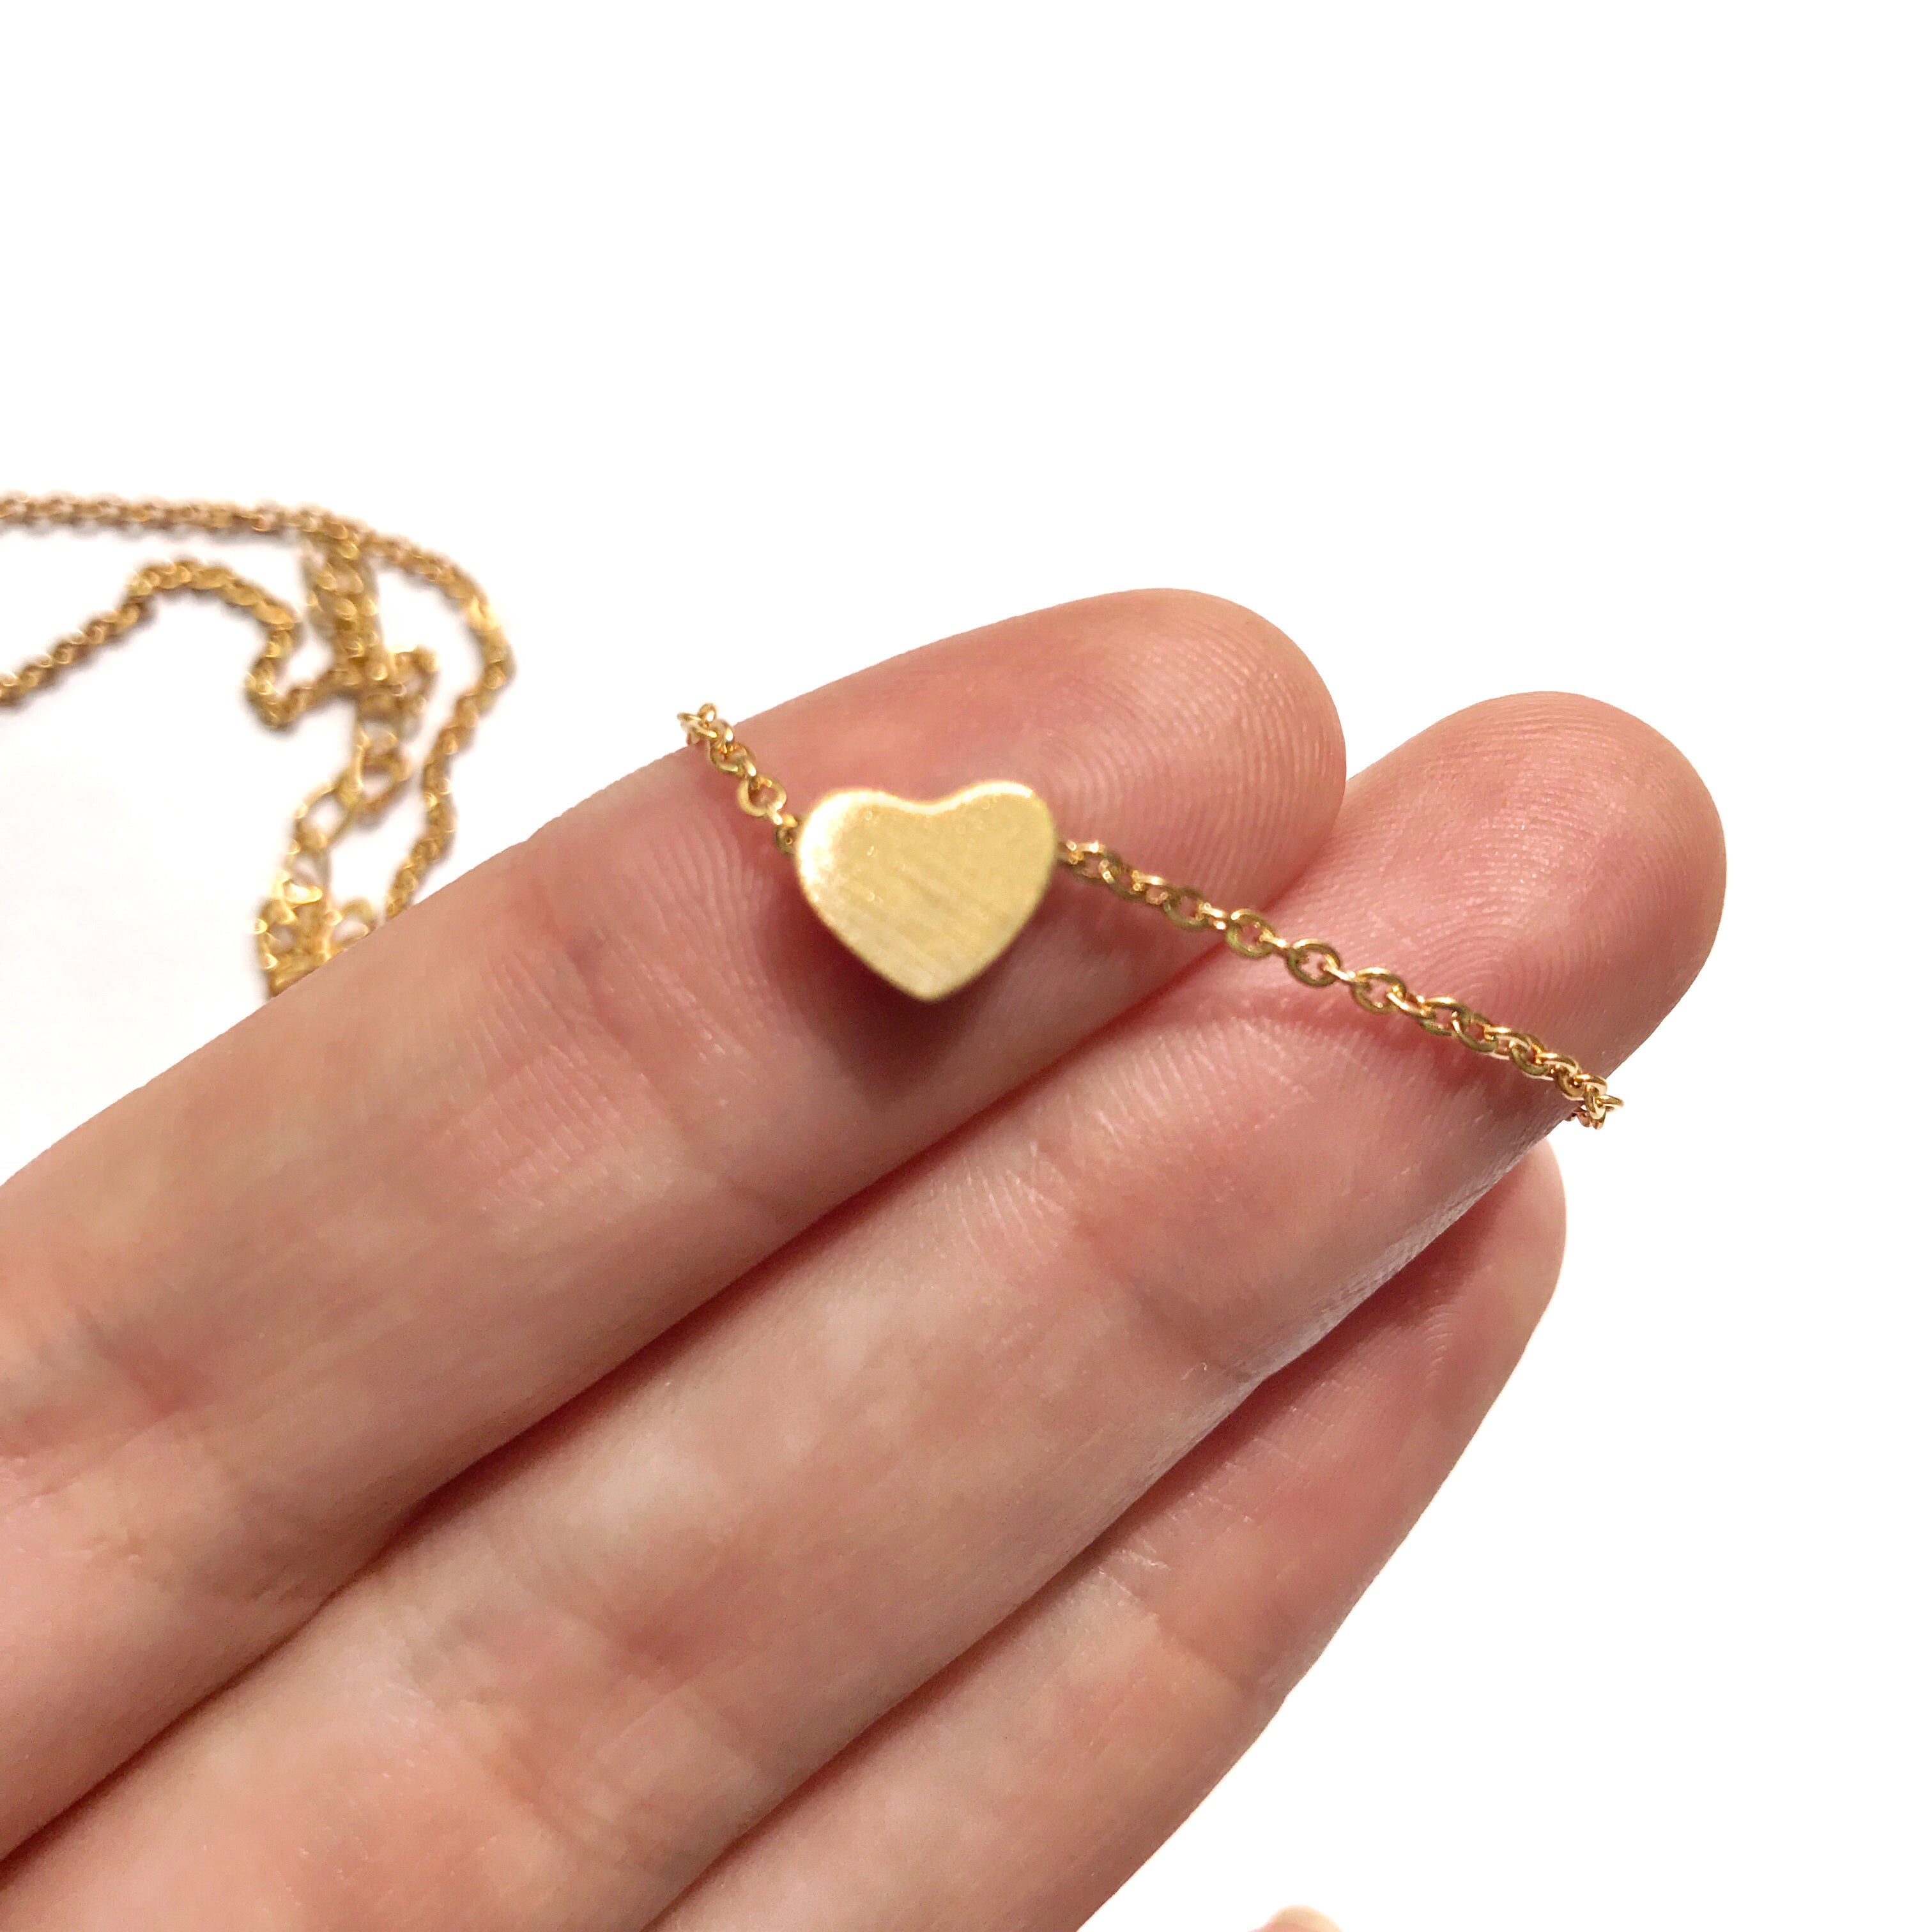 Gold "I Heart you" Necklace Victoria Collection